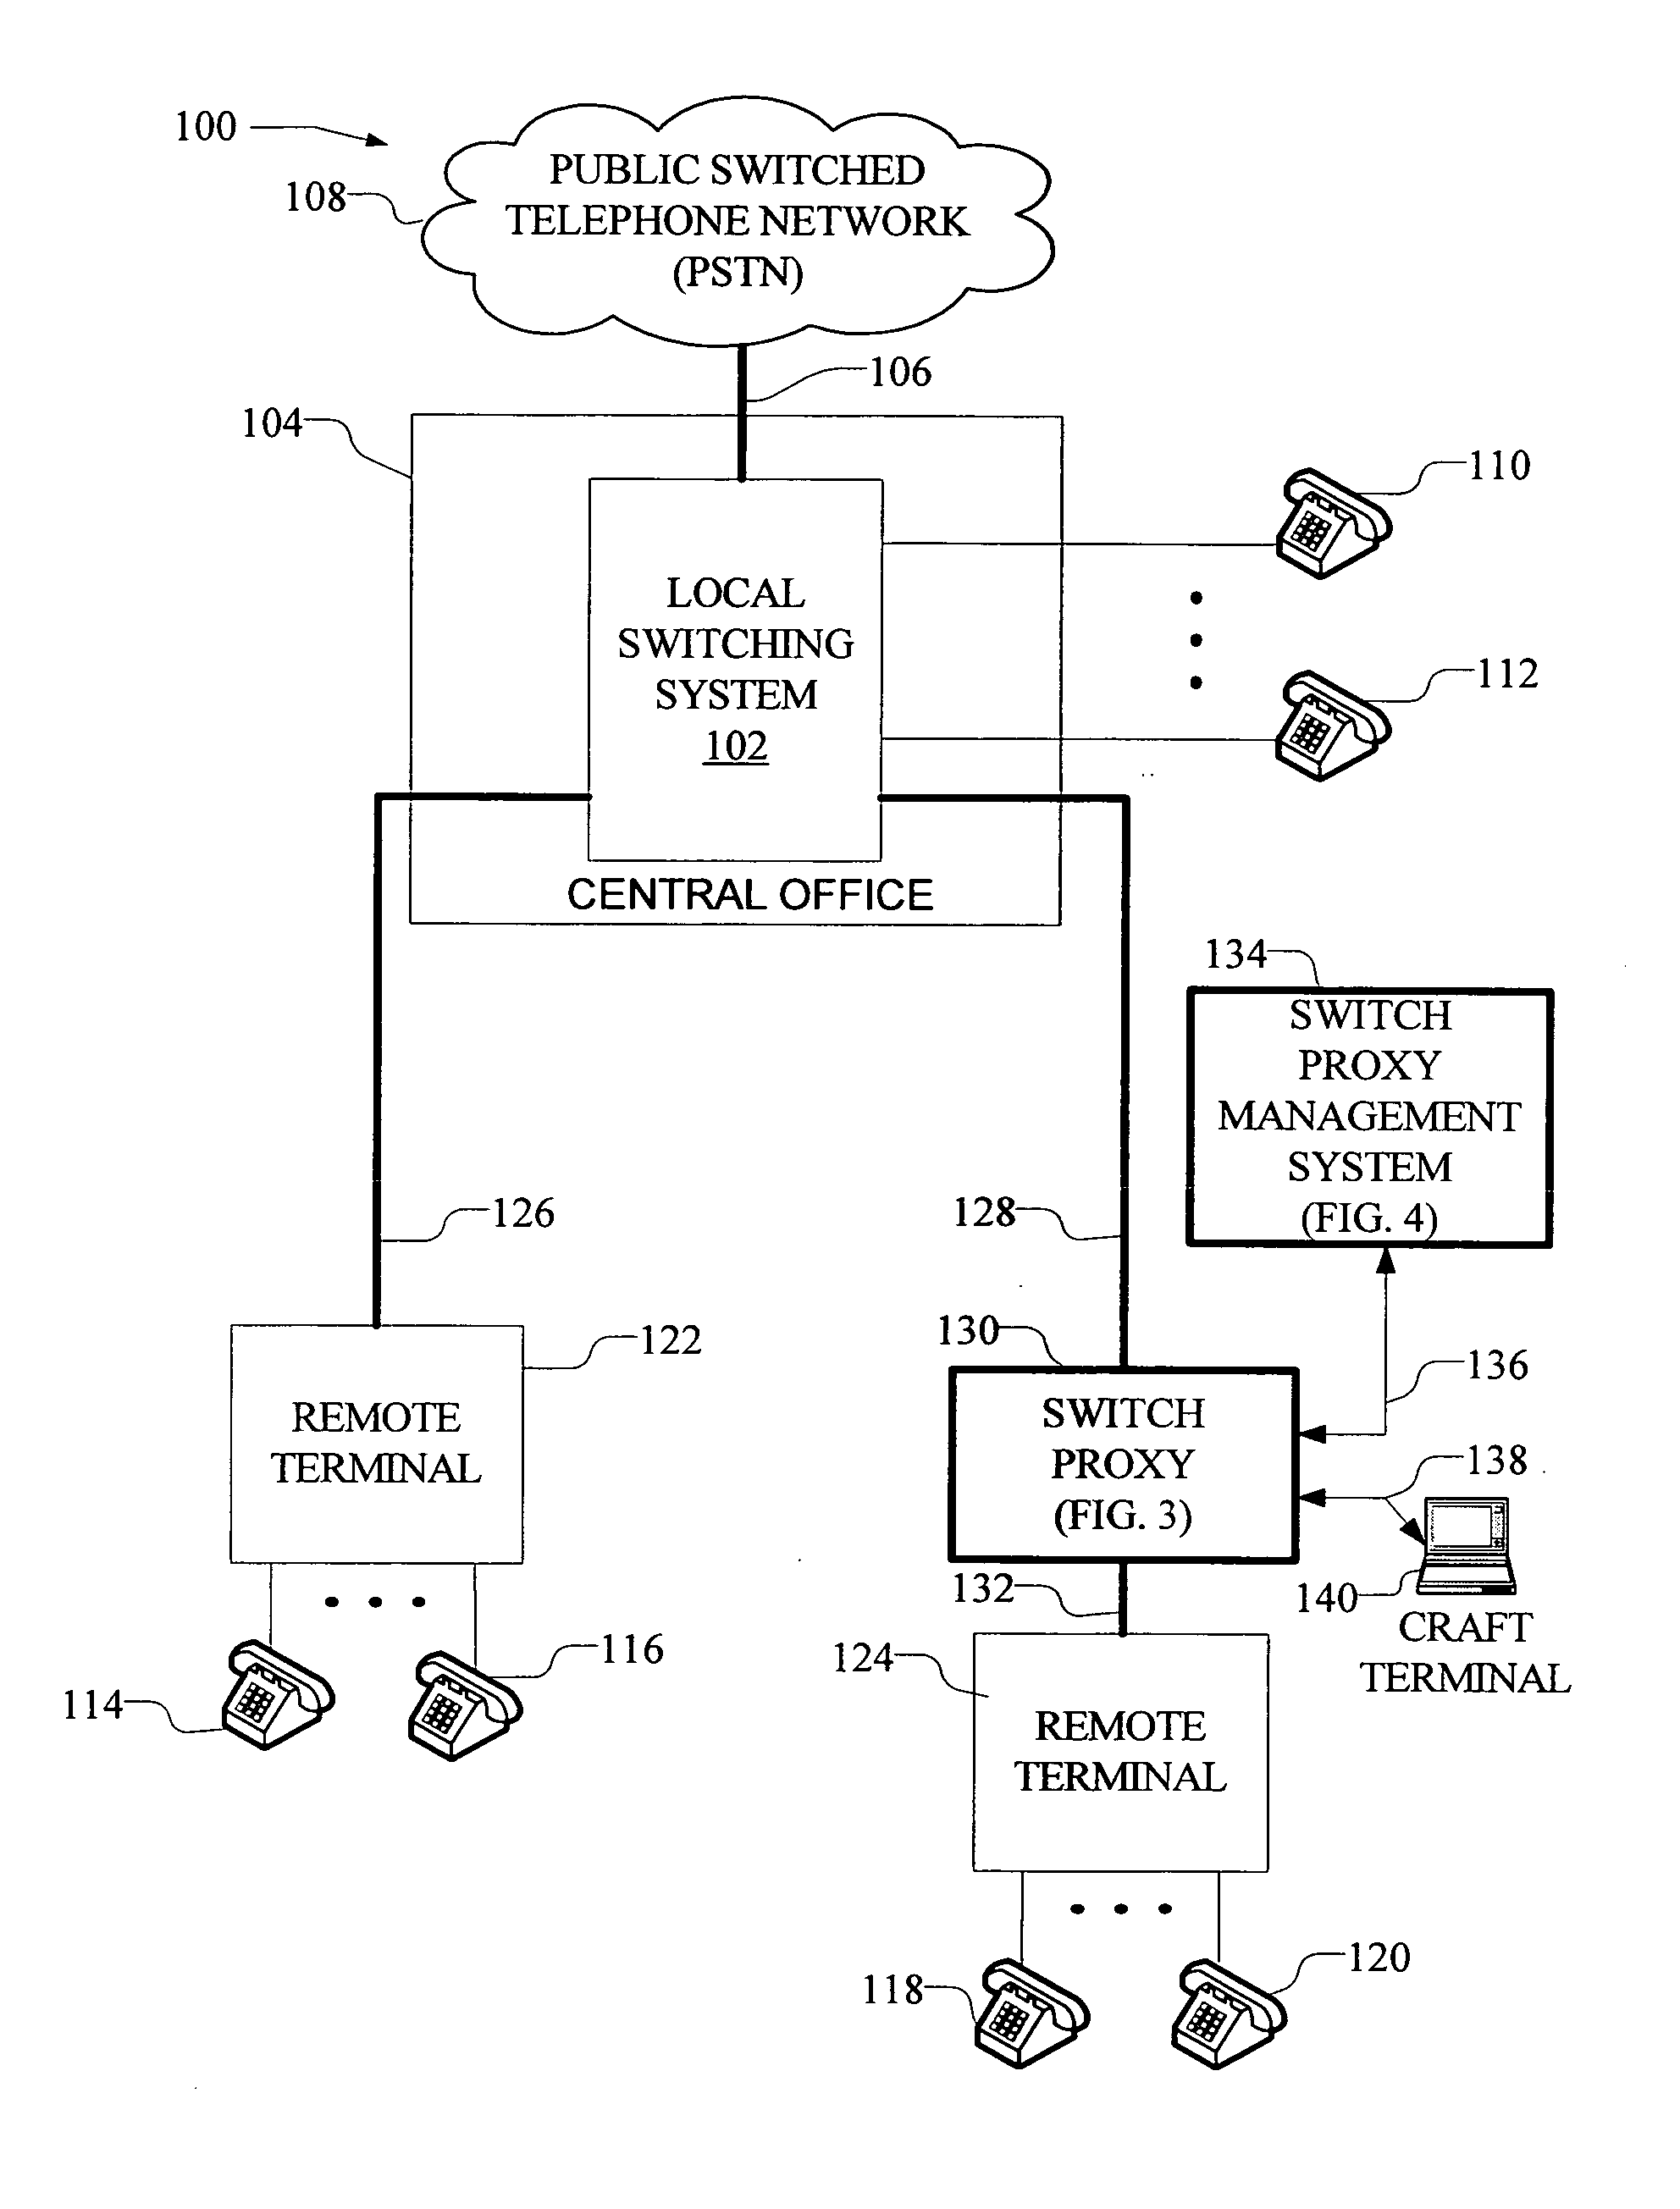 Switch proxy for providing emergency stand-alone service in remote access systems